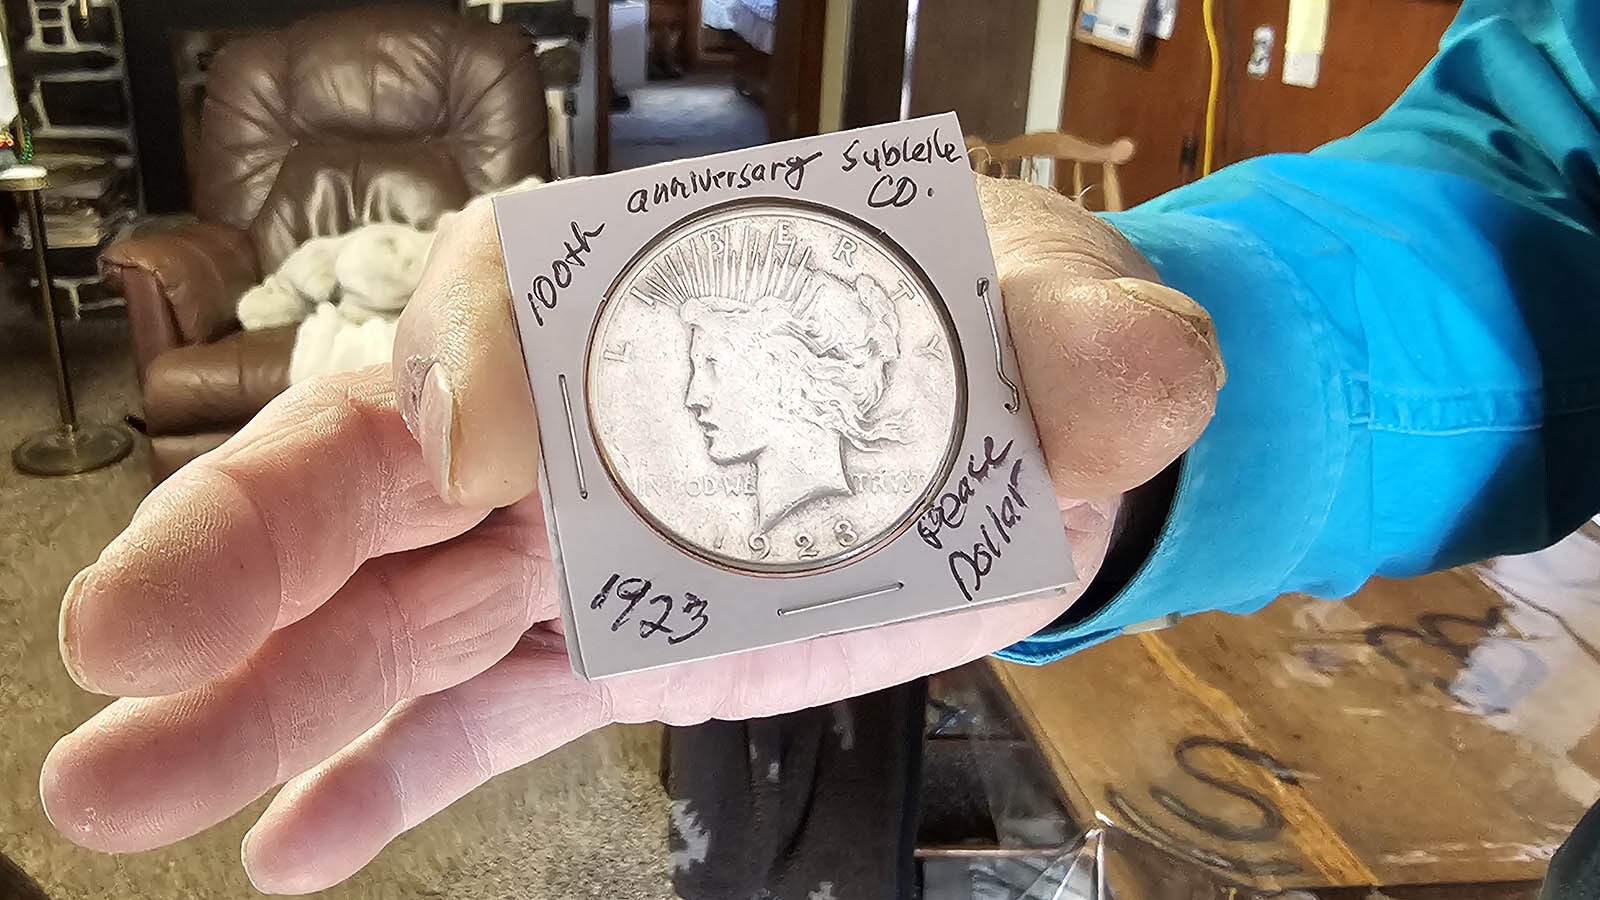 For the 100th anniversary of Sublette County, Stephens gave away 1923 peace silver dollars all year to people he knew or met.